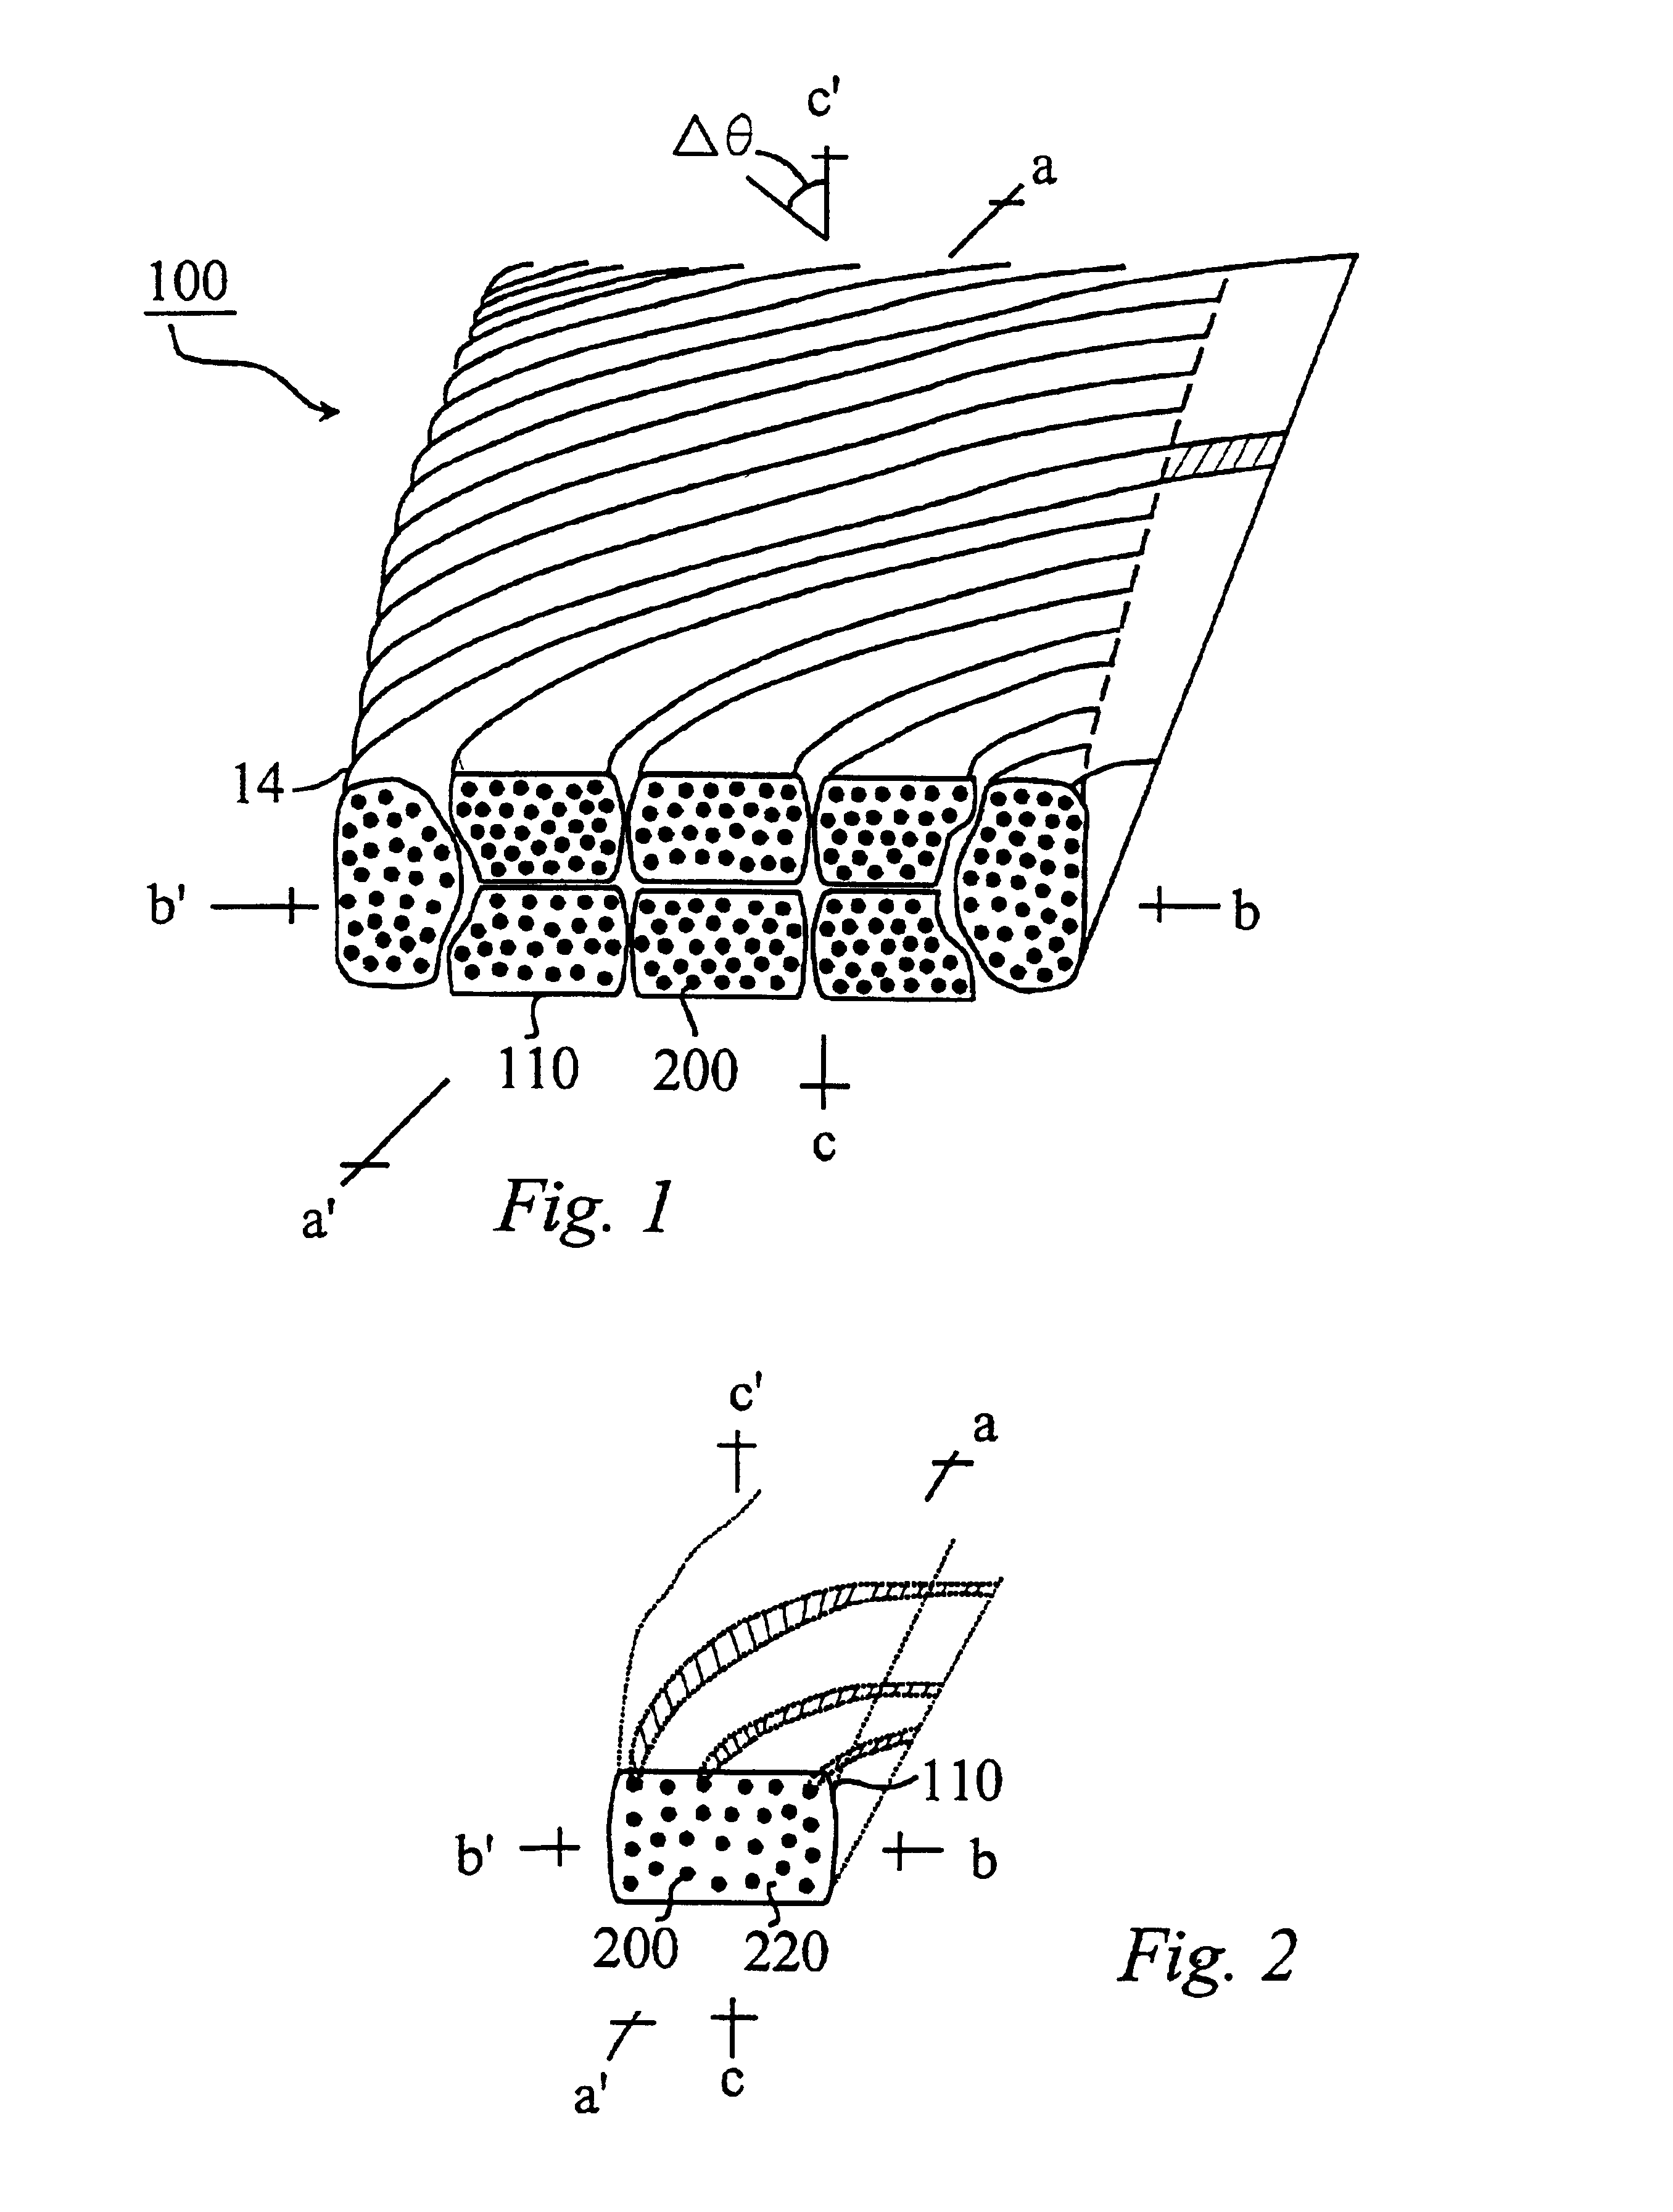 Cabled conductors containing anisotropic superconducting compounds